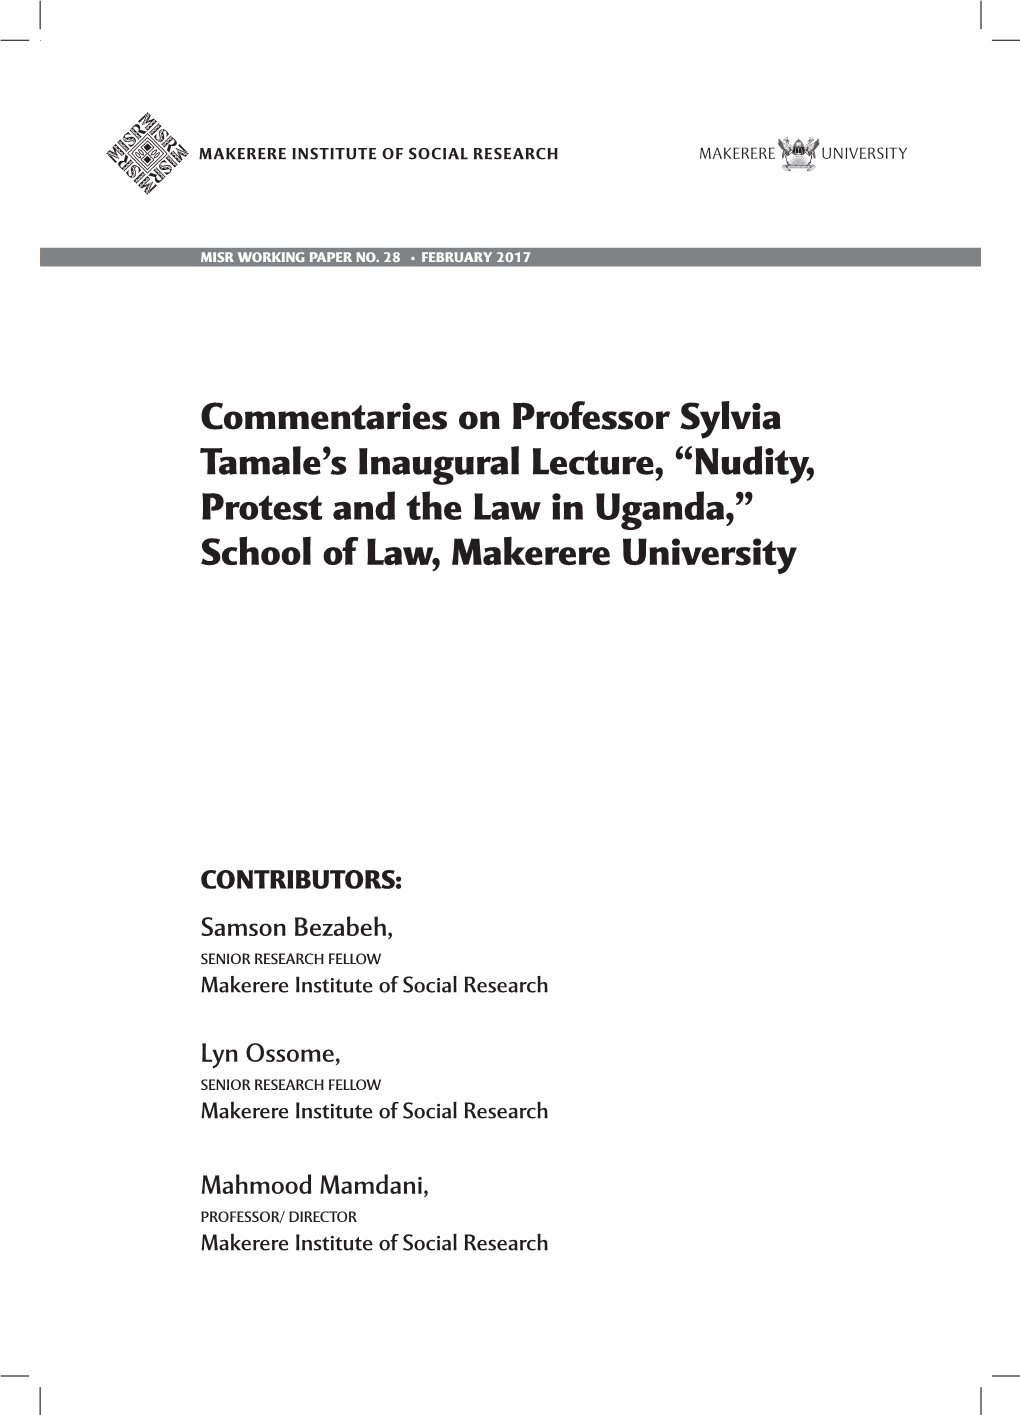 Commentaries on Professor Sylvia Tamale's Inaugural Lecture, “Nudity, Protest and the Law in Uganda,” School of Law, Maker